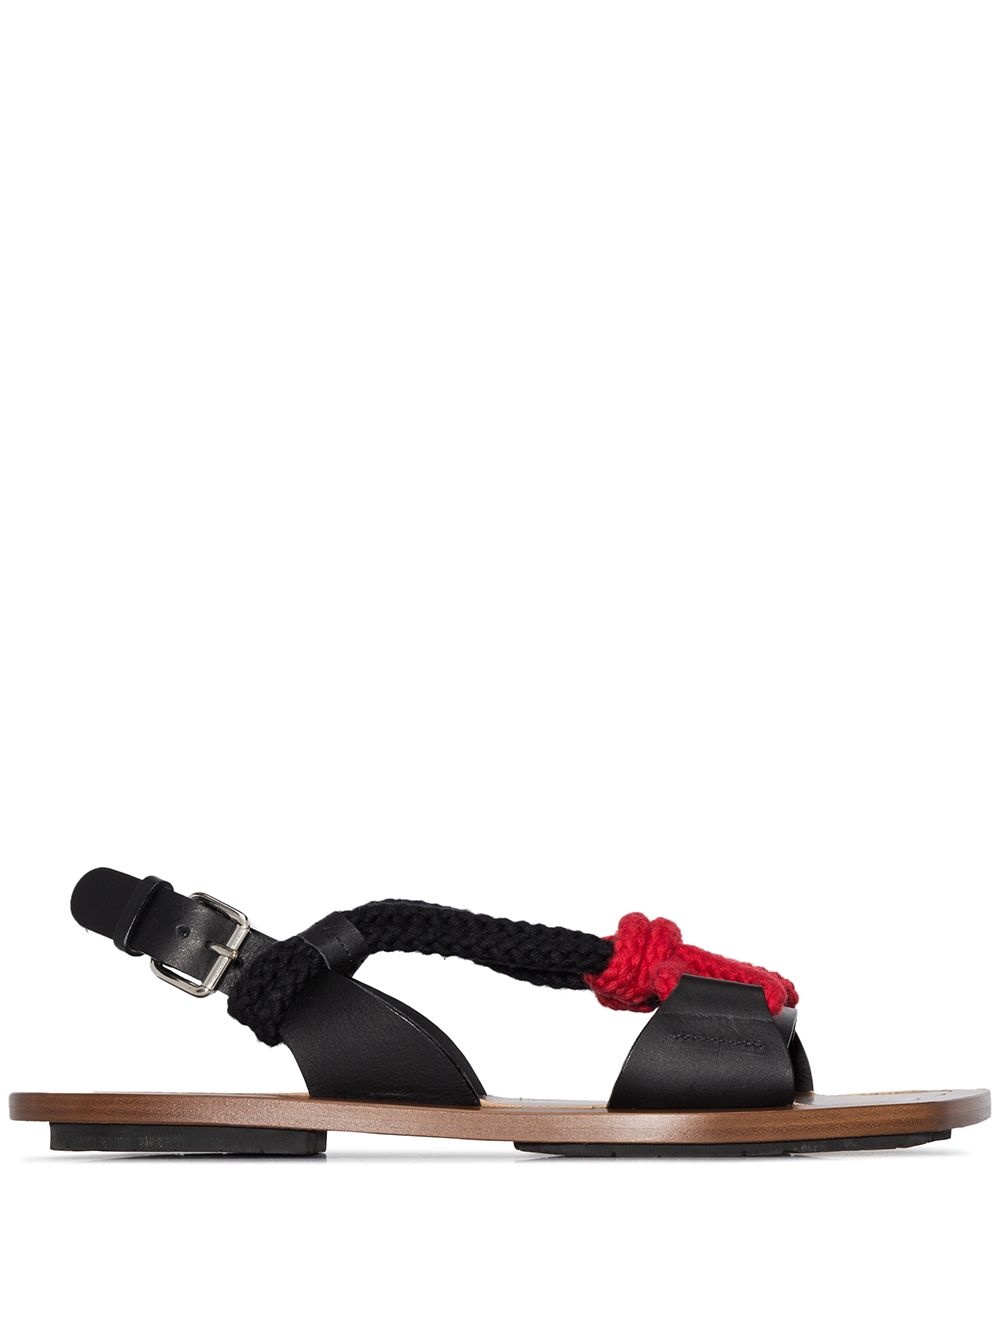 rope strap sandals - 1